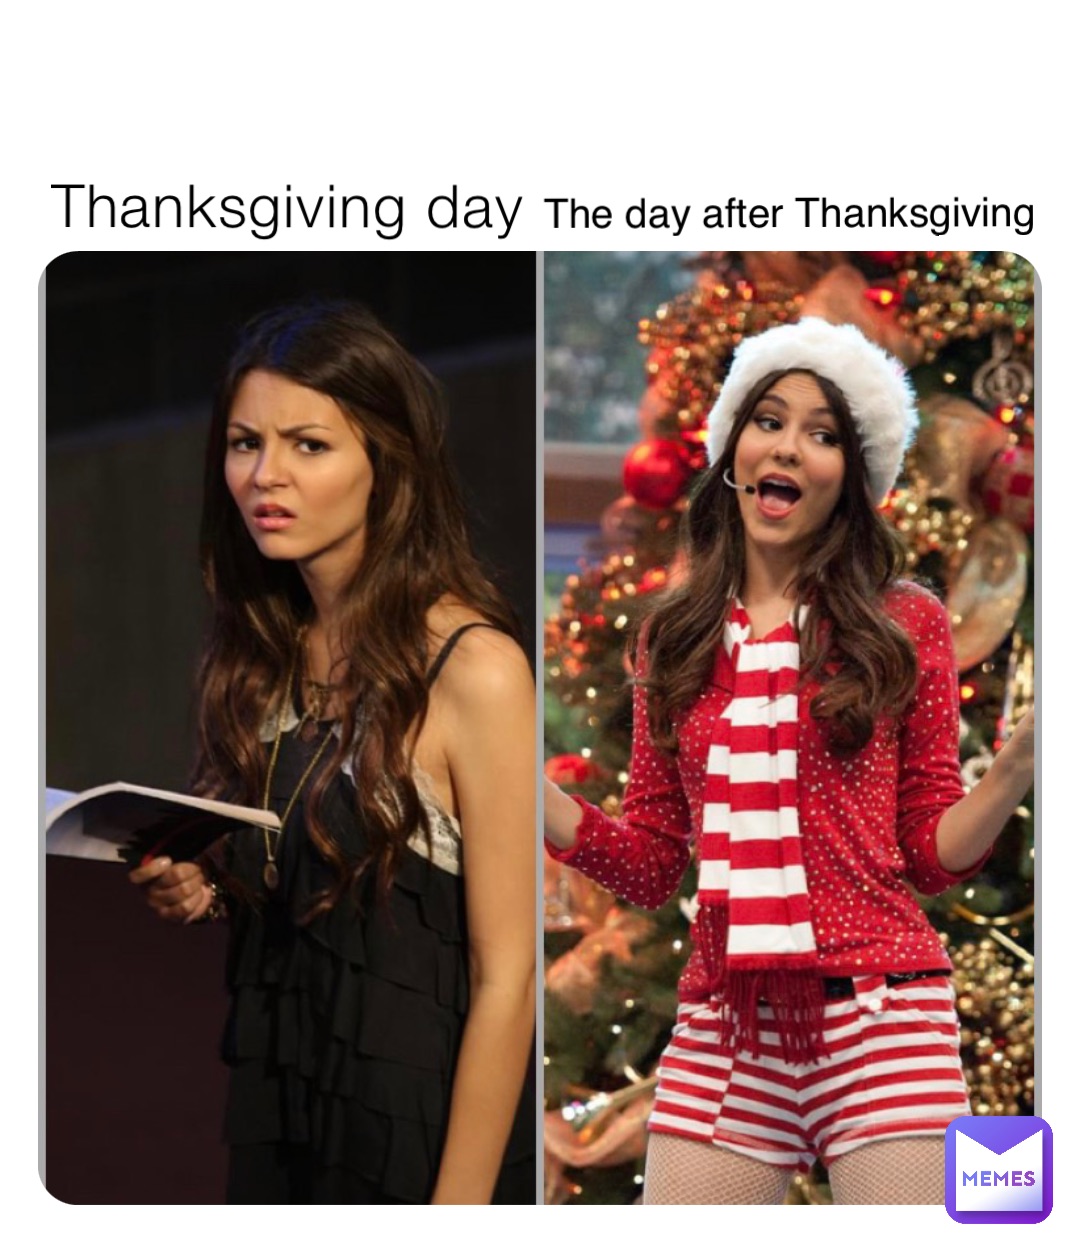 Thanksgiving day The day after Thanksgiving